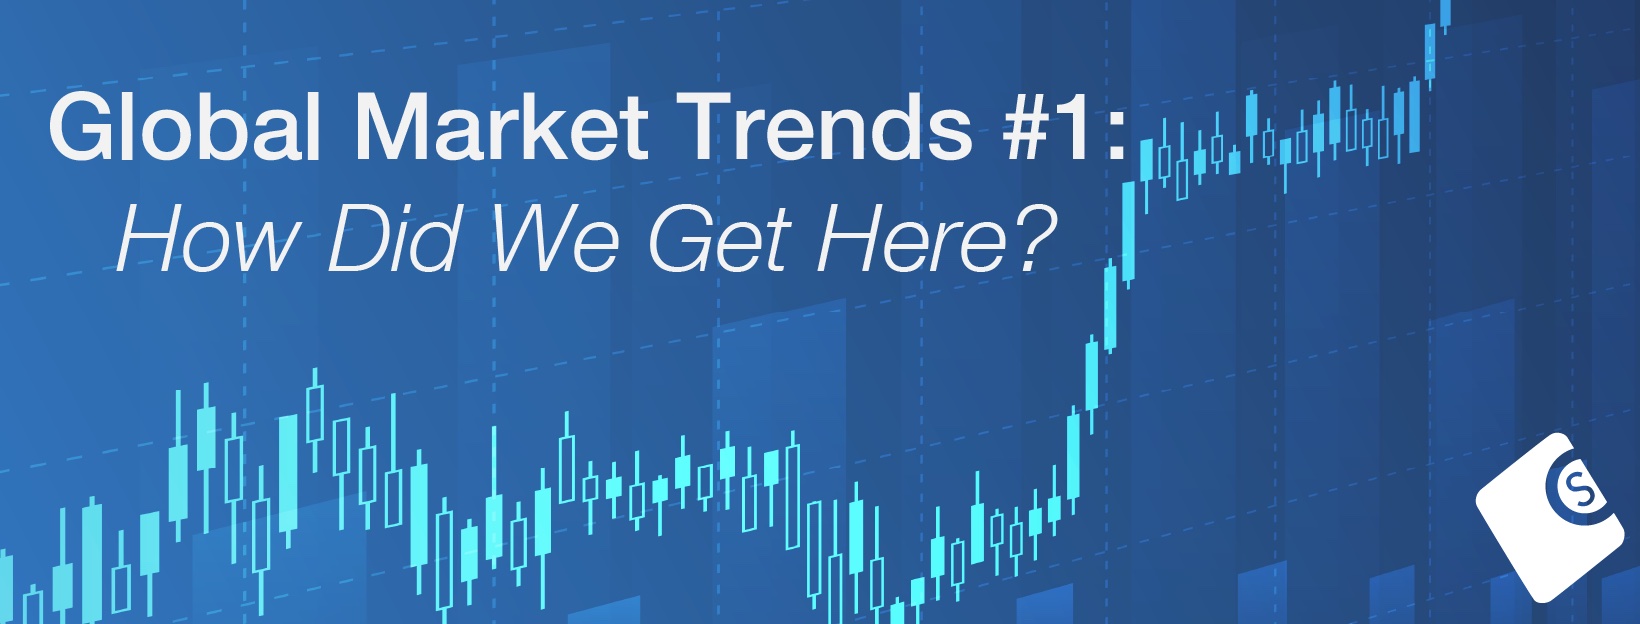 Global Market Trends #1: How Did We Get Here?